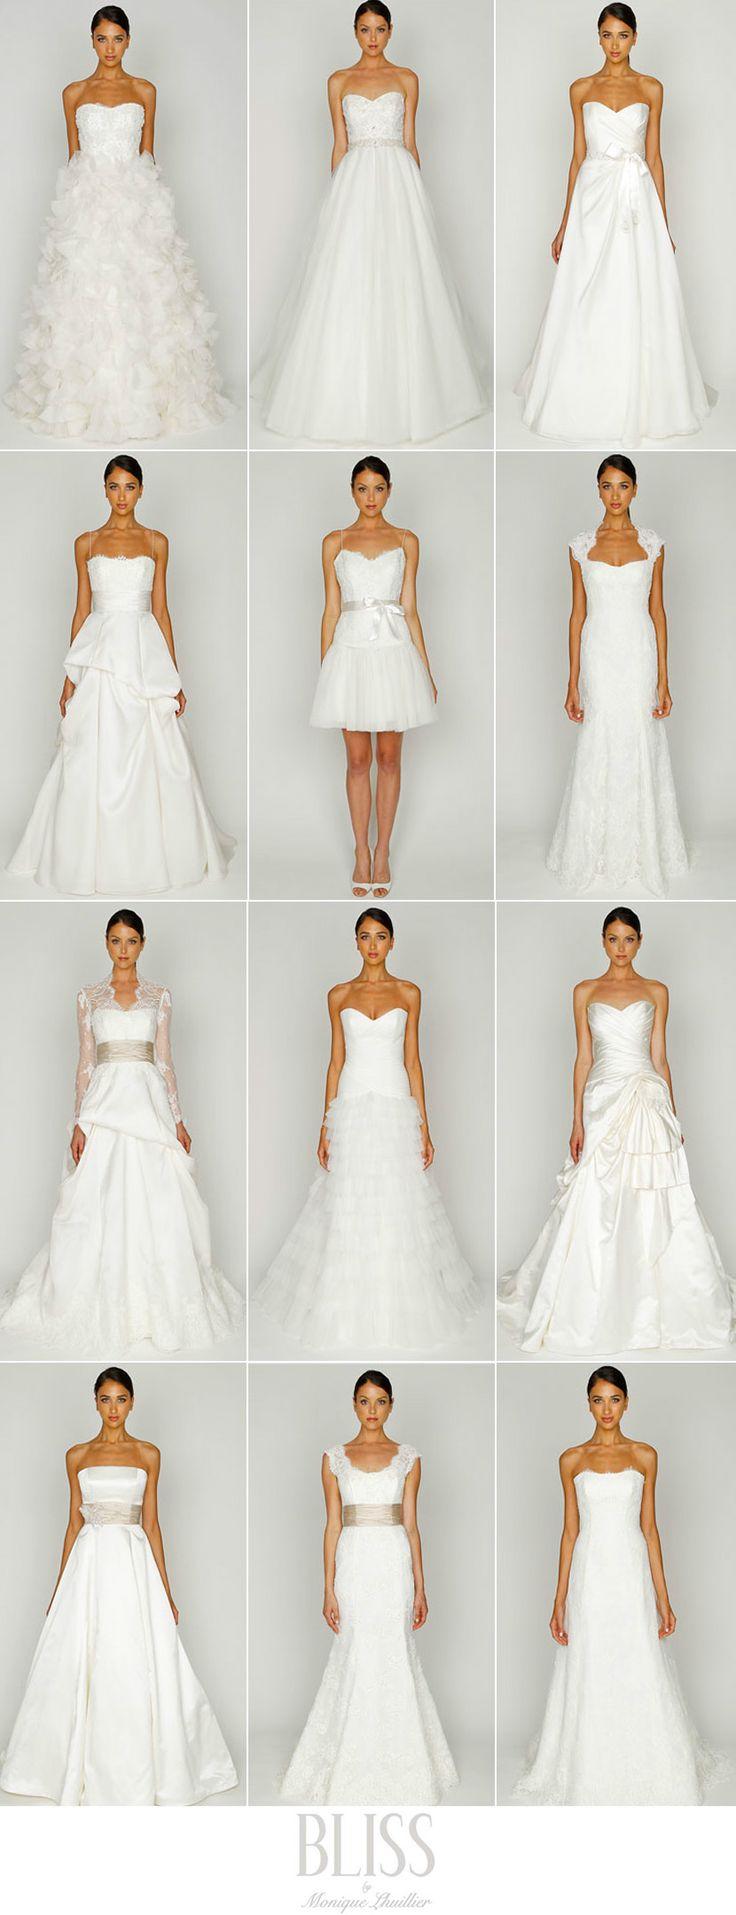 Top Different Shapes Of Wedding Dresses Learn more here | weddingdecorate3